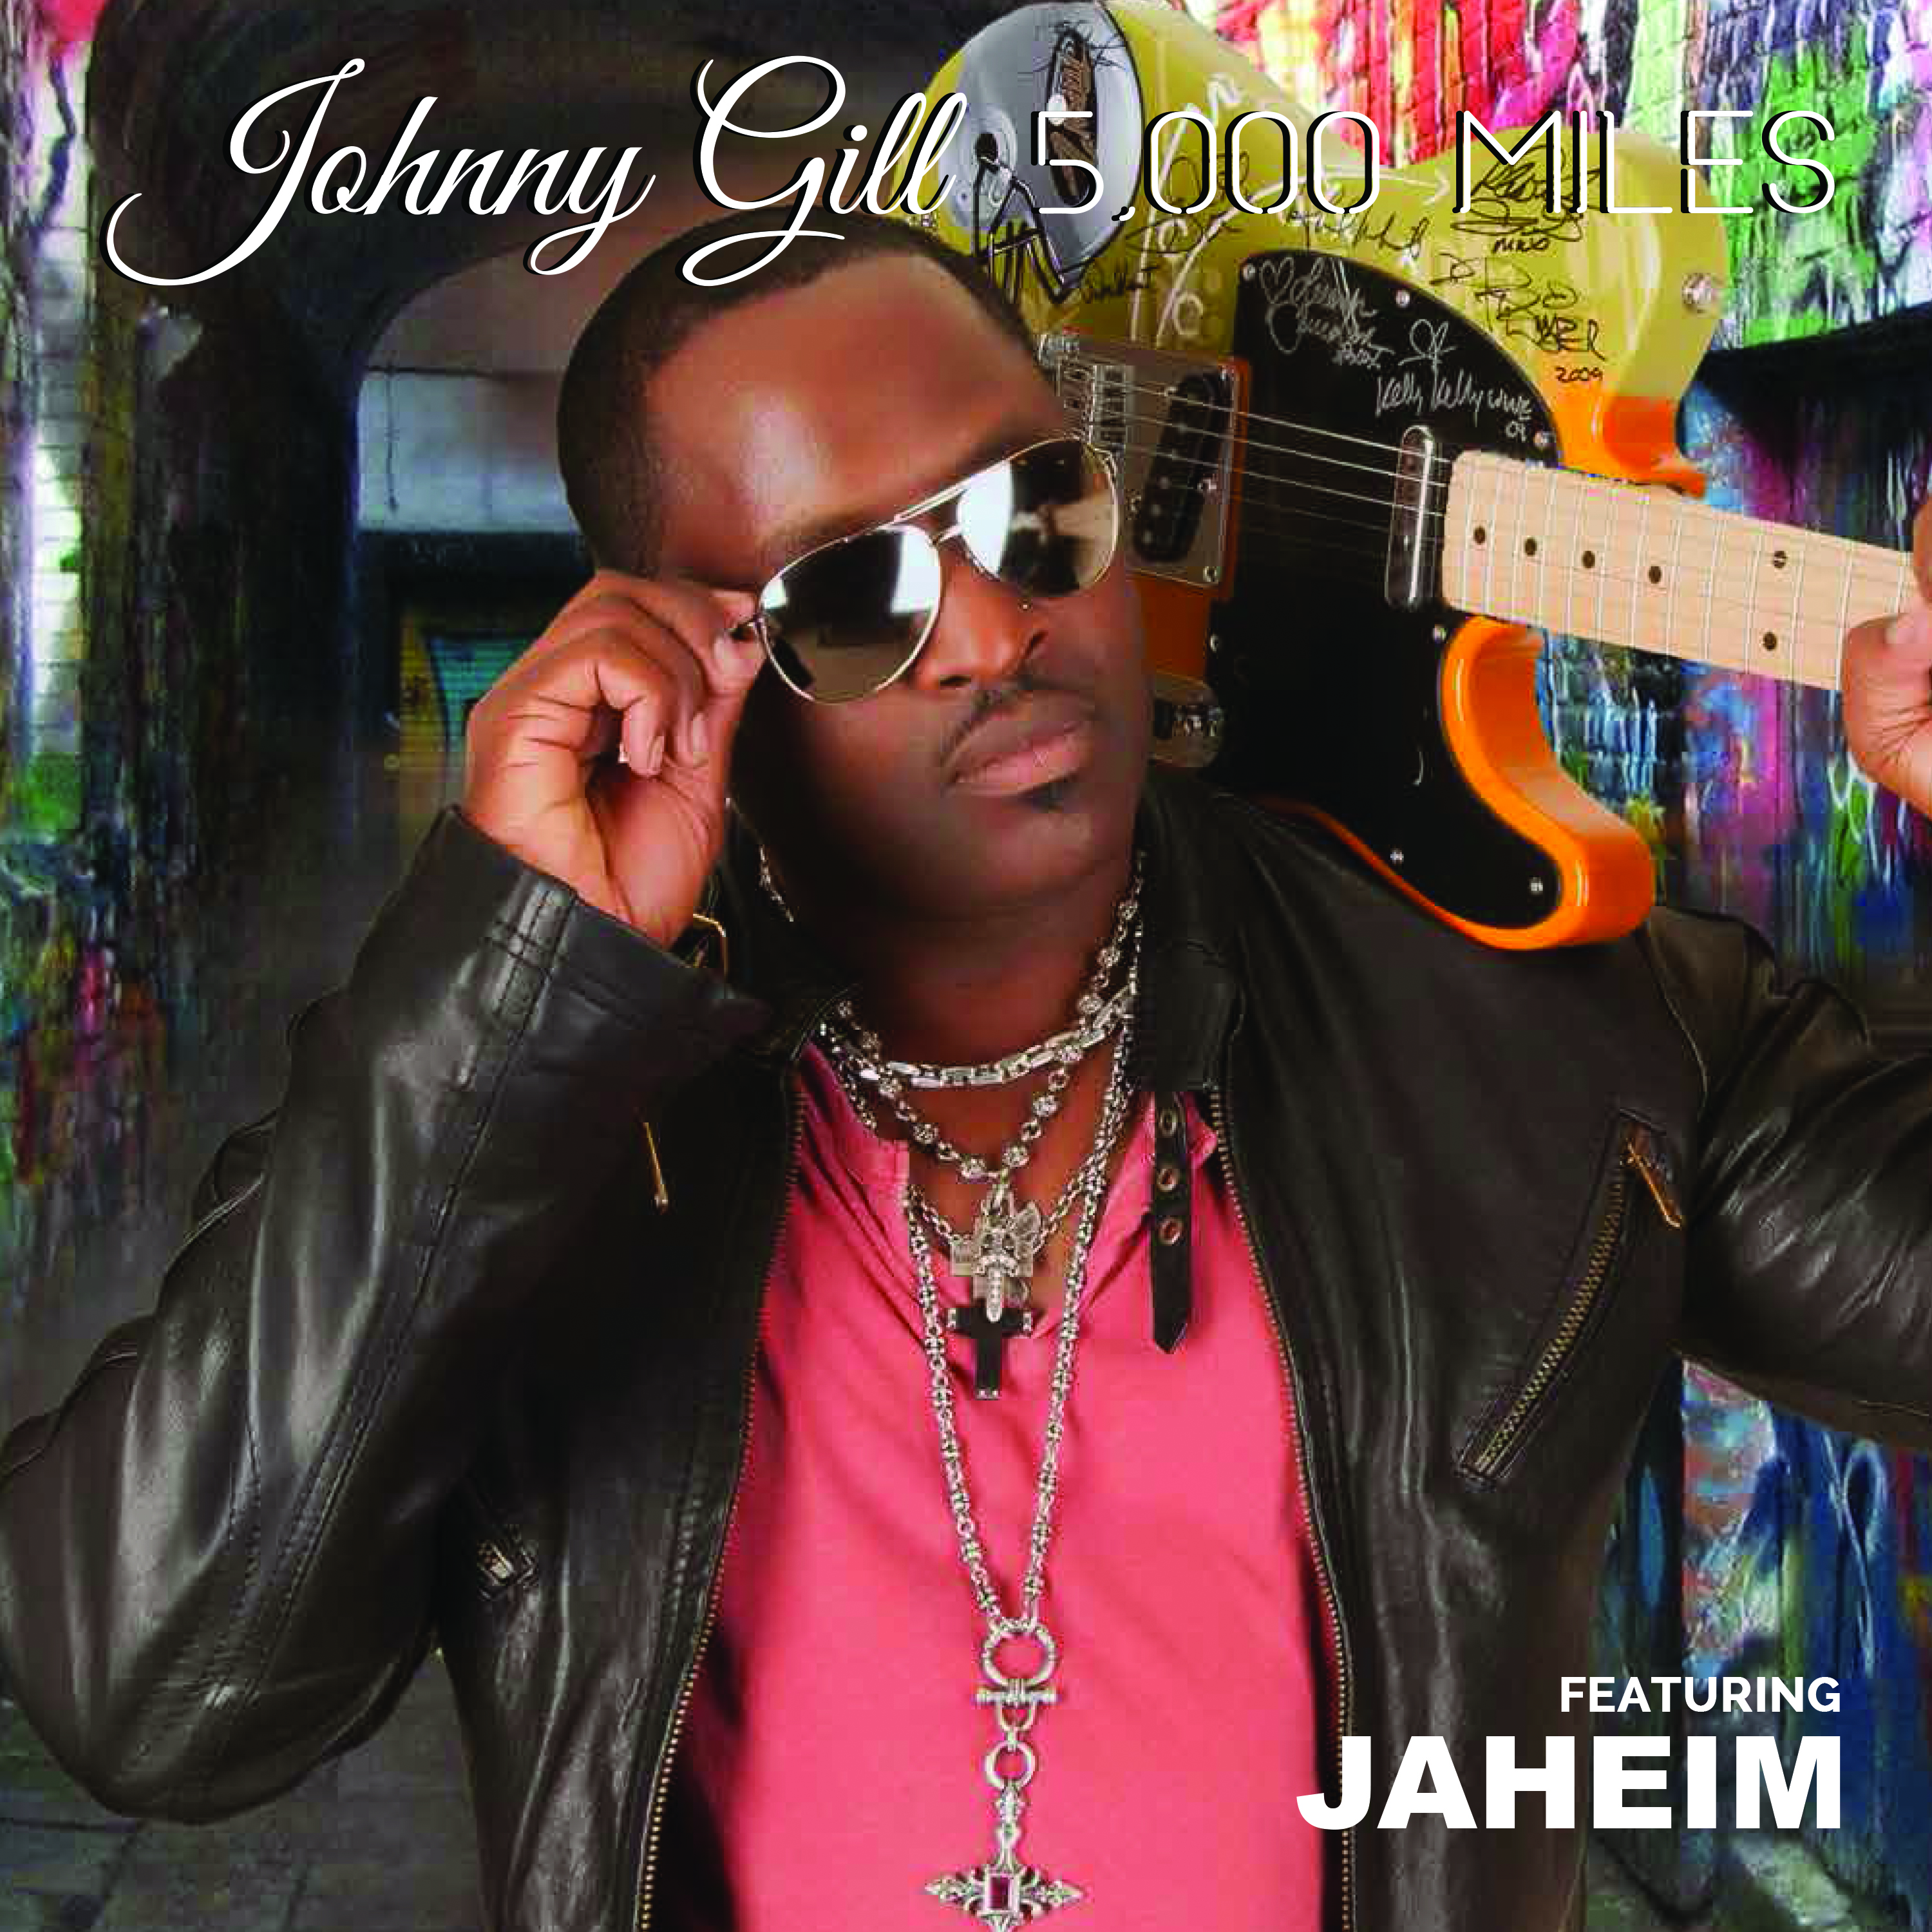 Johnny Gill Celebrates 4th Top 5 Hit From His "Game Changer" Album With "5000 Miles" featuring Jaheim